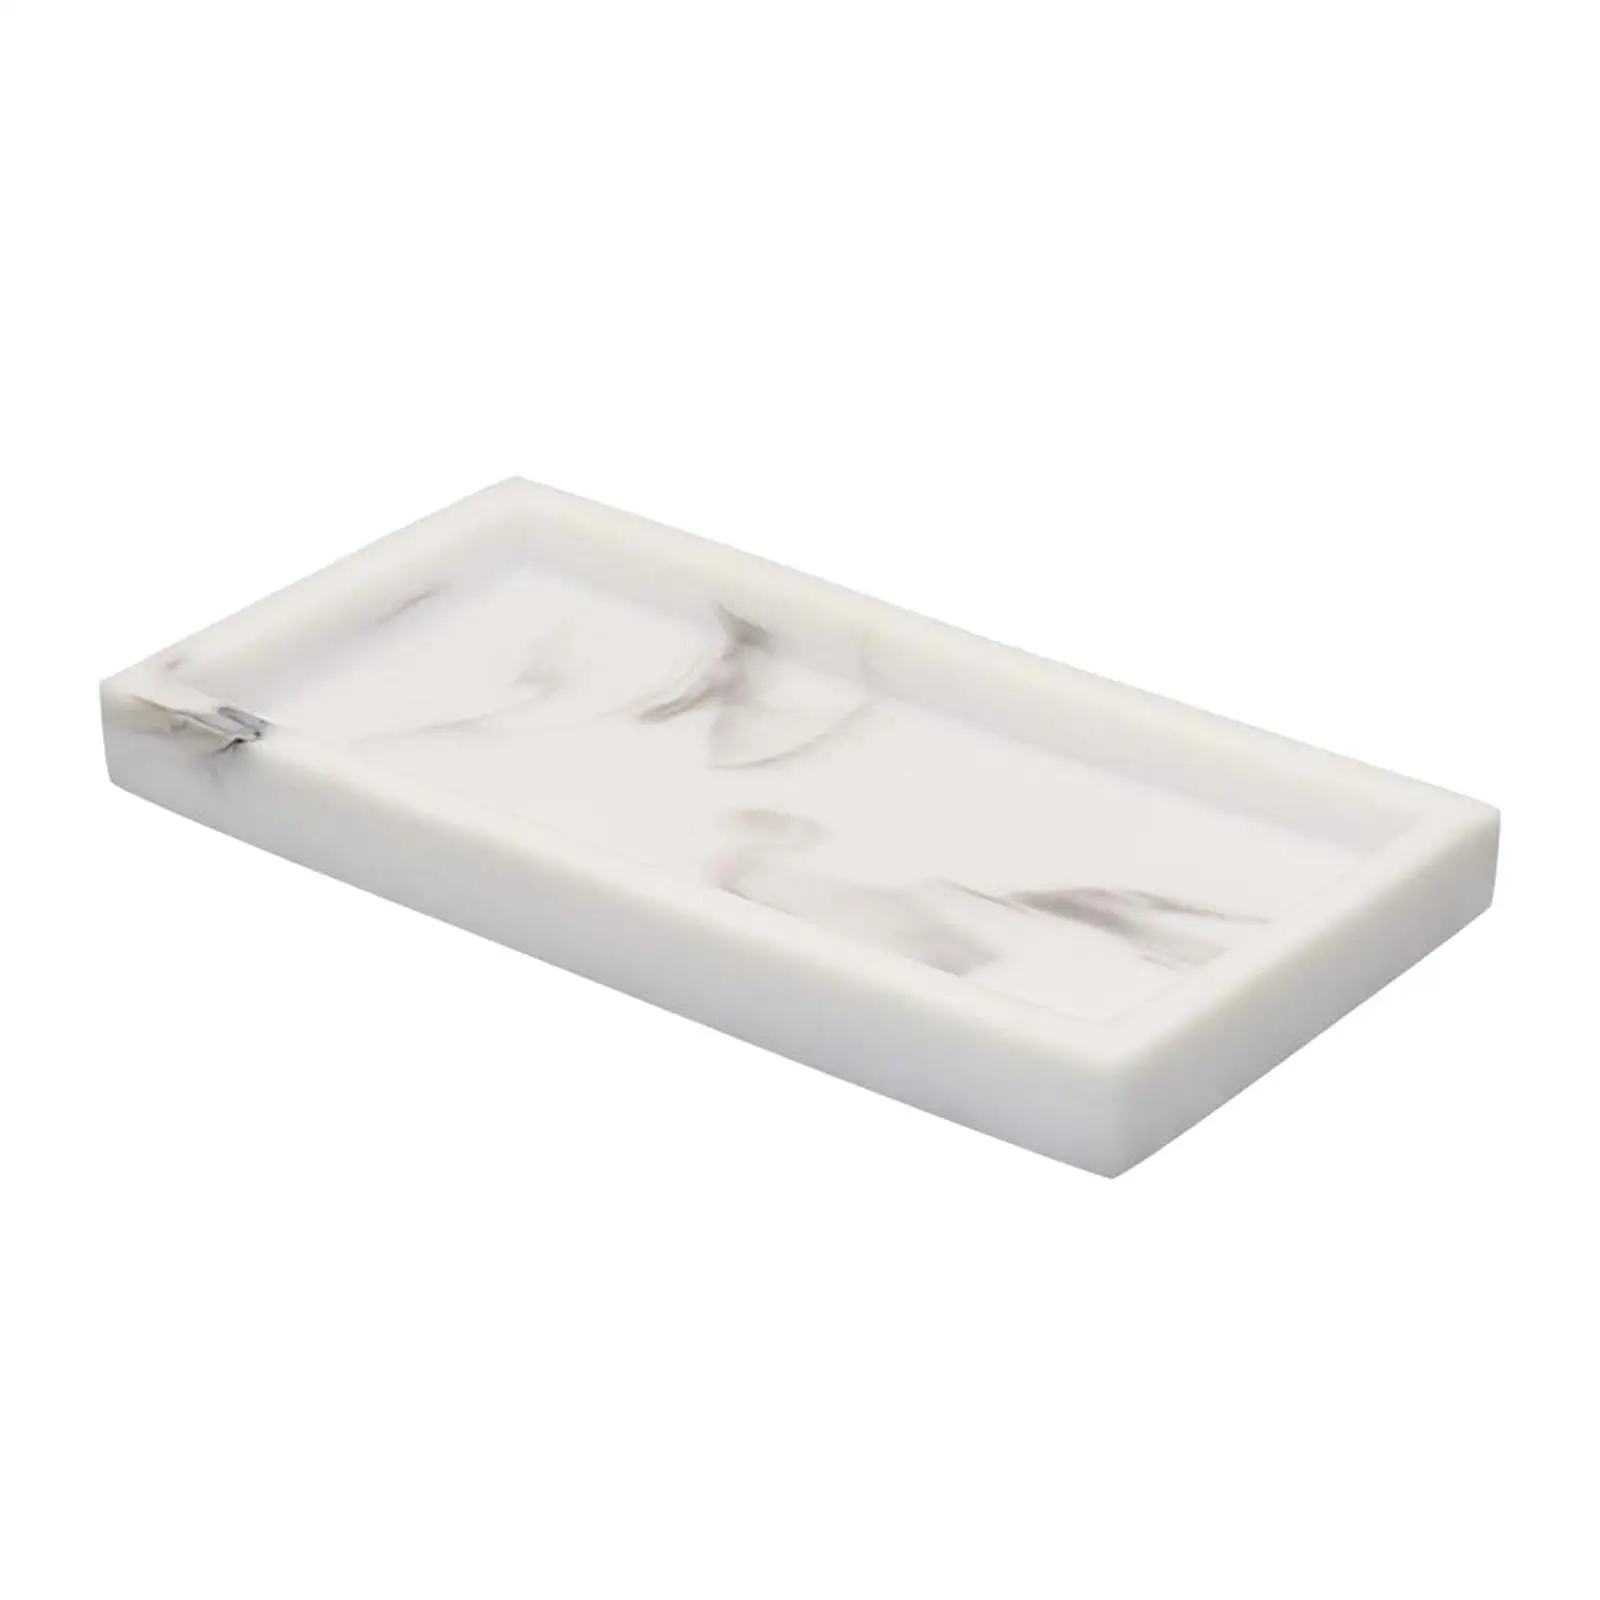 Imitation Marble Resin Bathtub Tray Countertop Dish for Jewelry Candles 